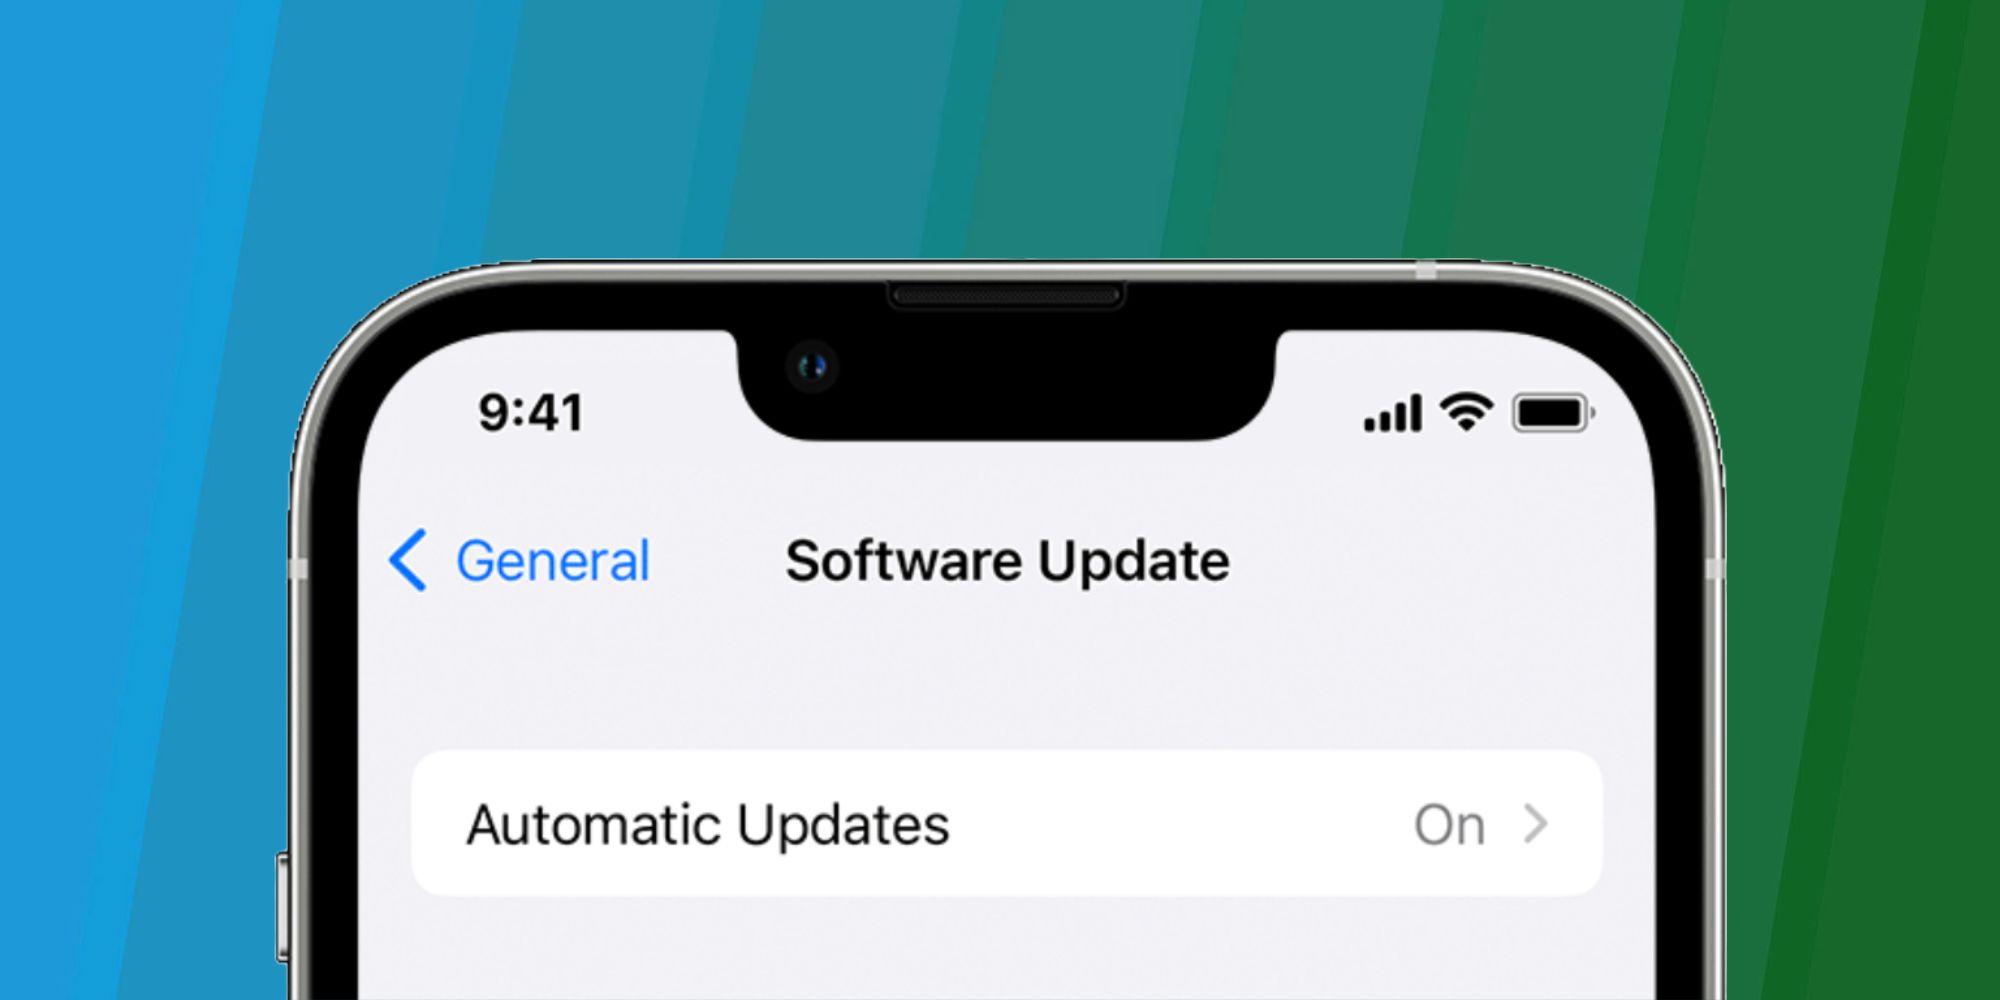 An iPhone showing the Software Updates Menu with Automatic Updates toggled On